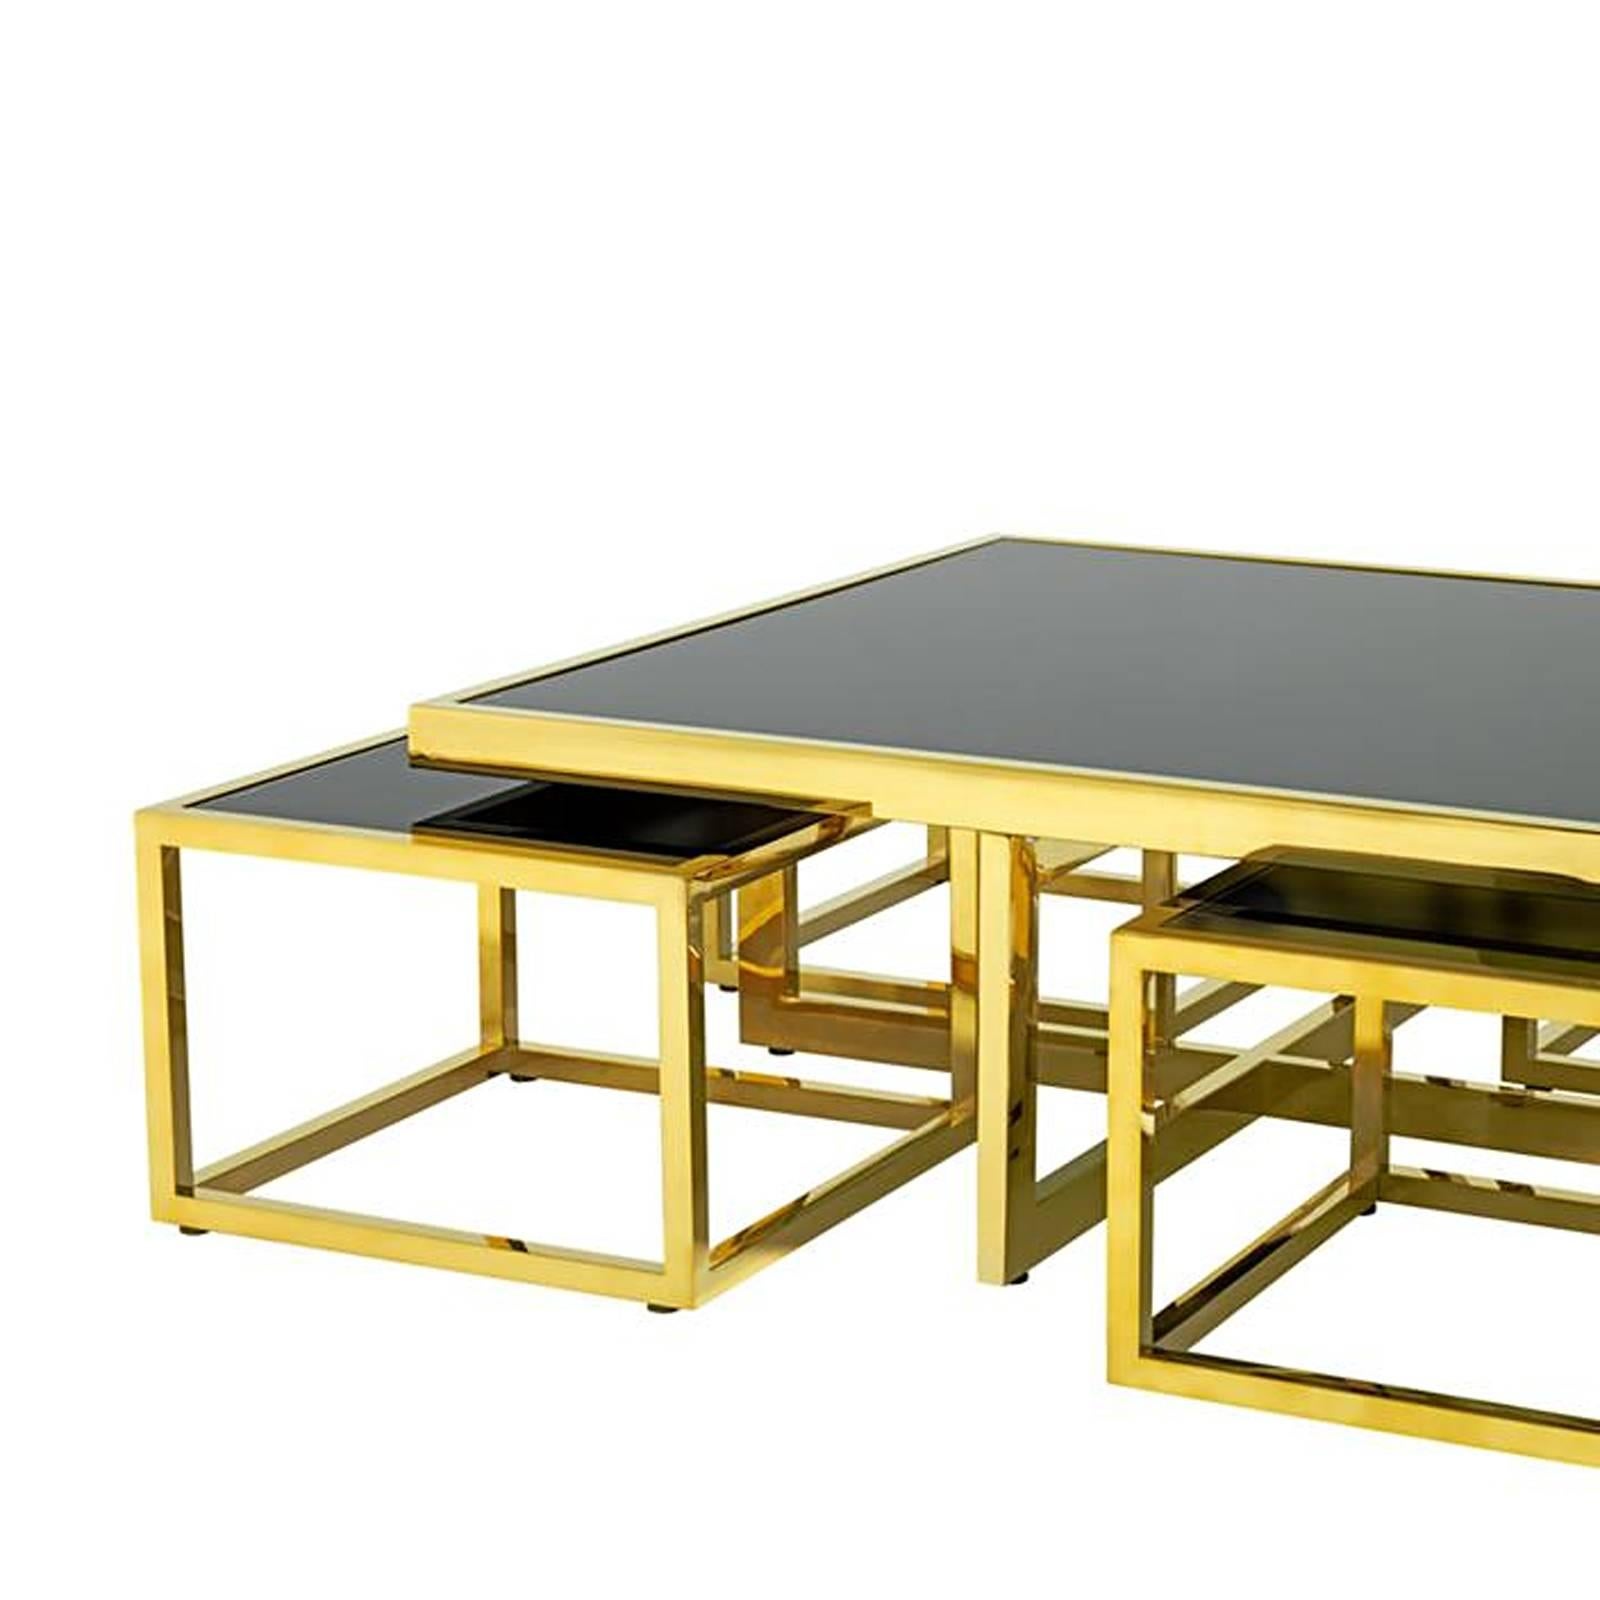 Coffee table four pieces with gold finish structure
and smoked tempered black glass tops. Price: 4700,00 €
one square coffee table L 100 x D 100 x H 40 cm, included
four square side table L 48 x D 48 x H 33 cm.
Also available in polished